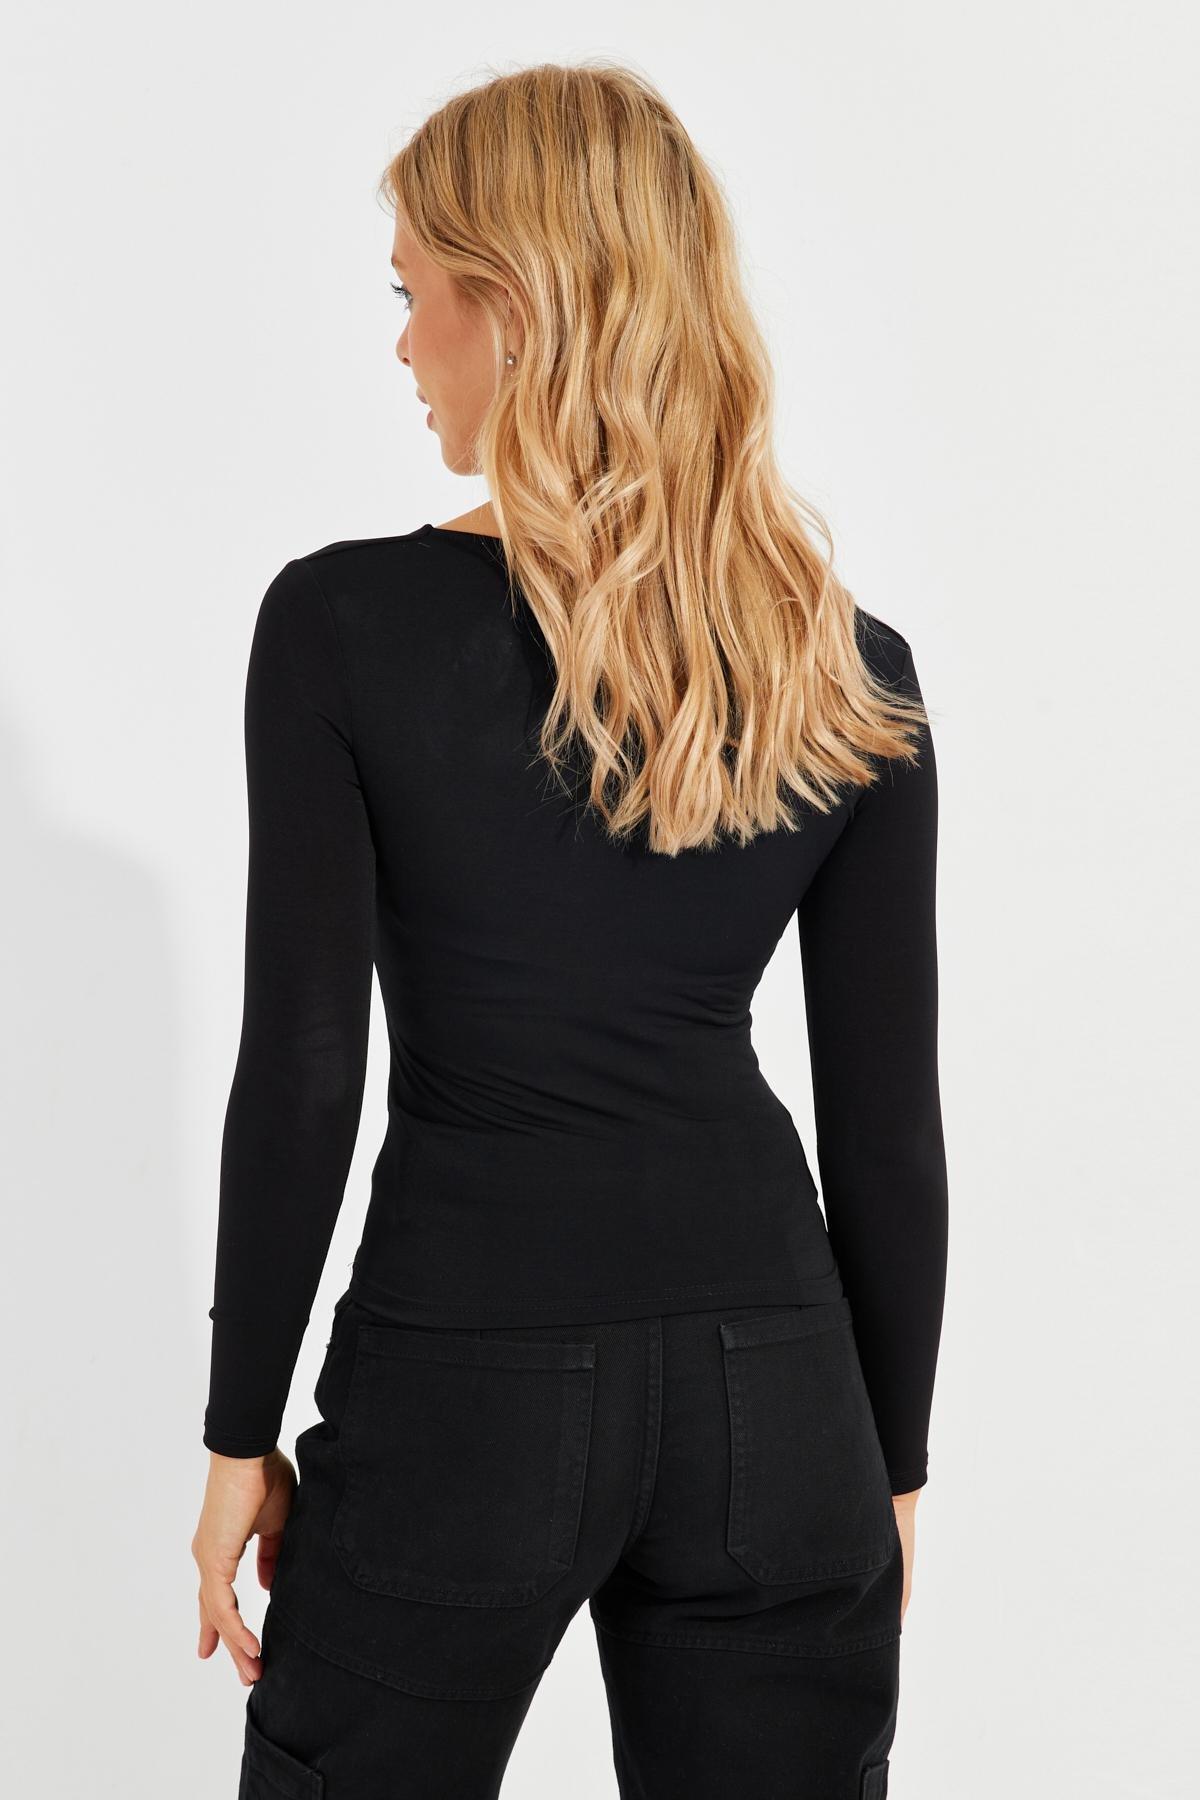 Cool & Sexy - Black Long Sleeve Blouse